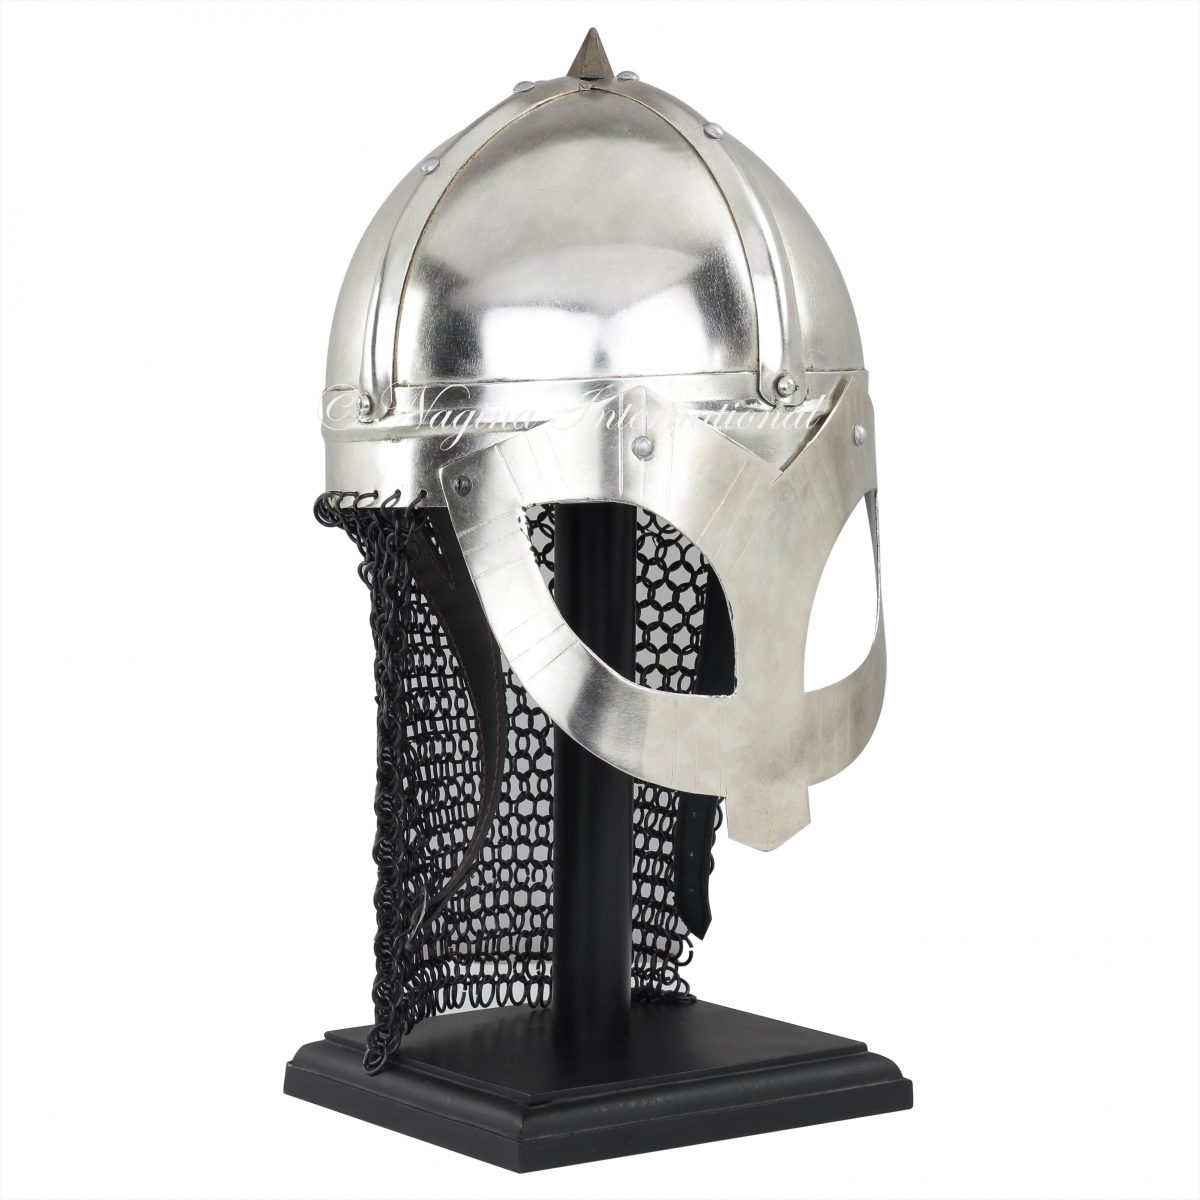 Panda Style Steel Silver Helmet with Chain Mail Attached Without Wooden Base | Medieval Warrior Wearable Armor Helmet | Leather Padded Lining| Roman Trojan Warrior Knight Spartan LARP Costume